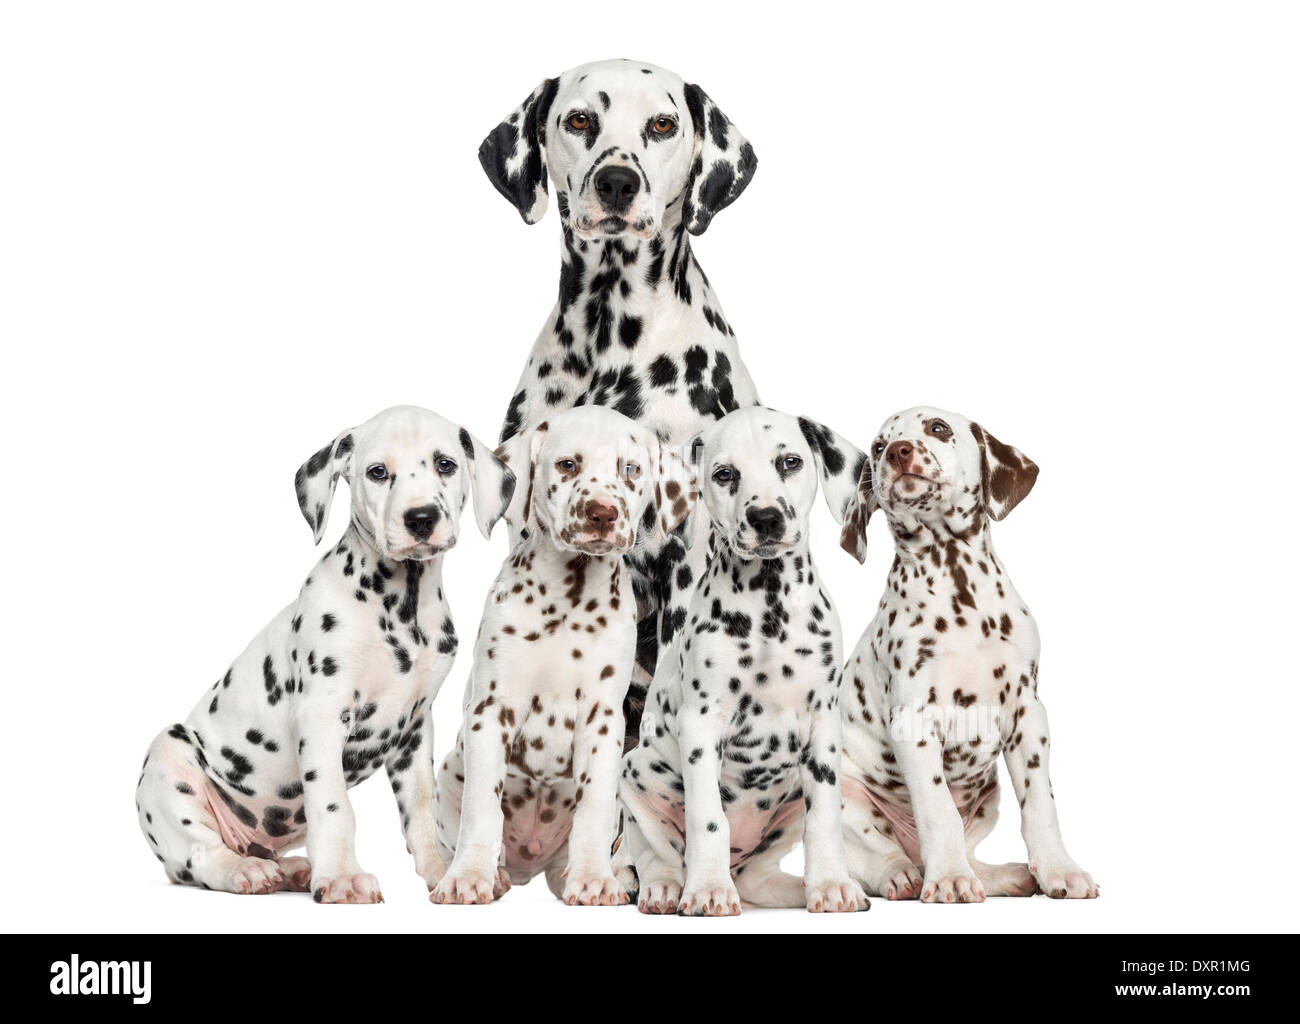 Dalmatian mom and puppies against white background Stock Photo